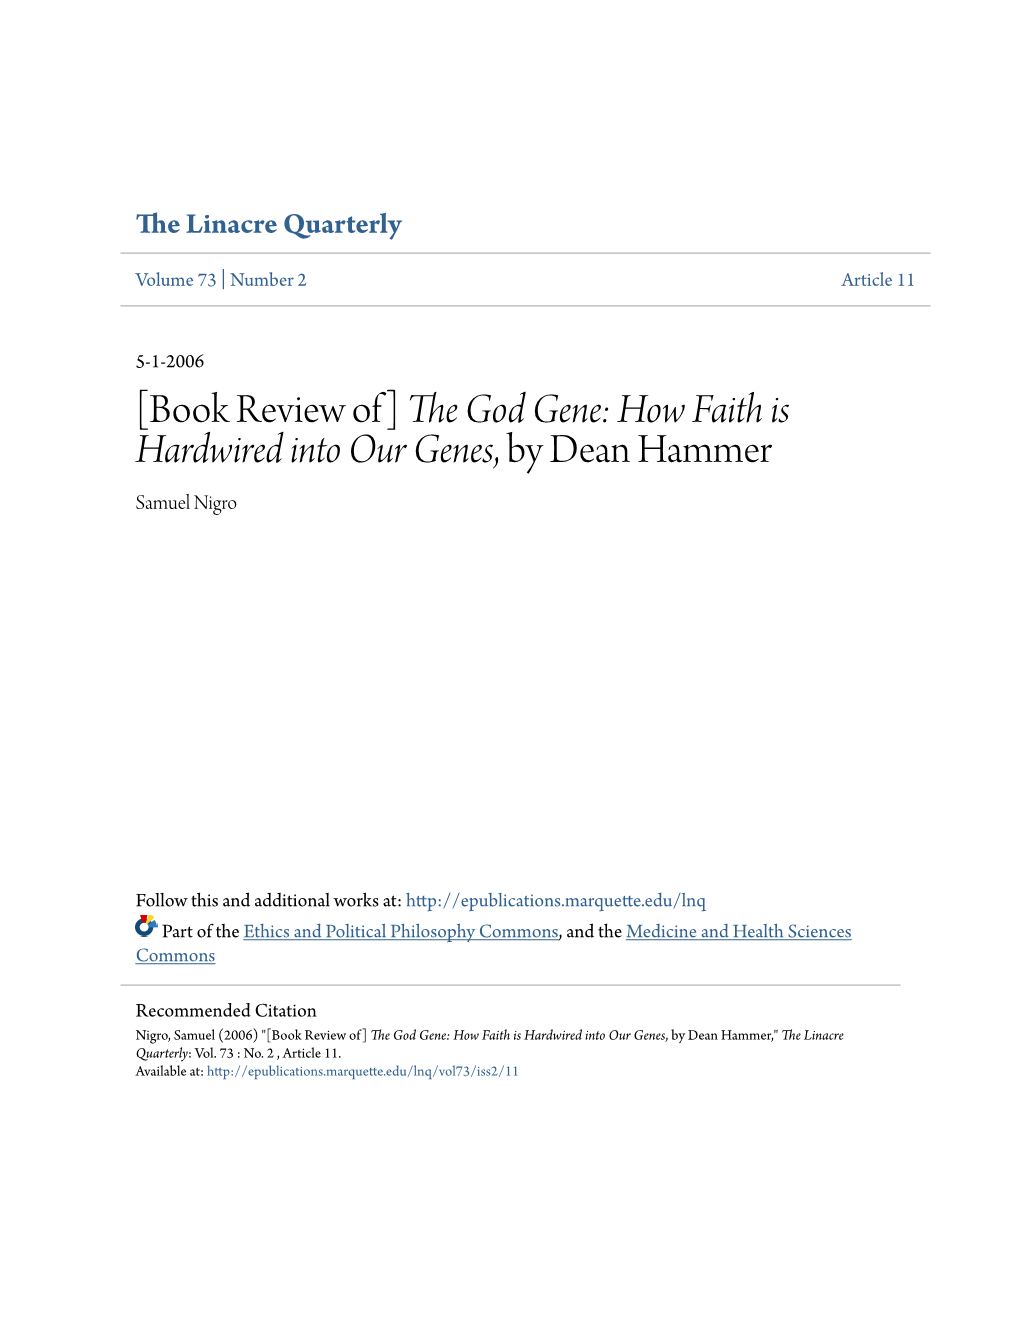 The God Gene: How Faith Is Hardwired Into Our Genes, by Dean Hammer Samuel Nigro